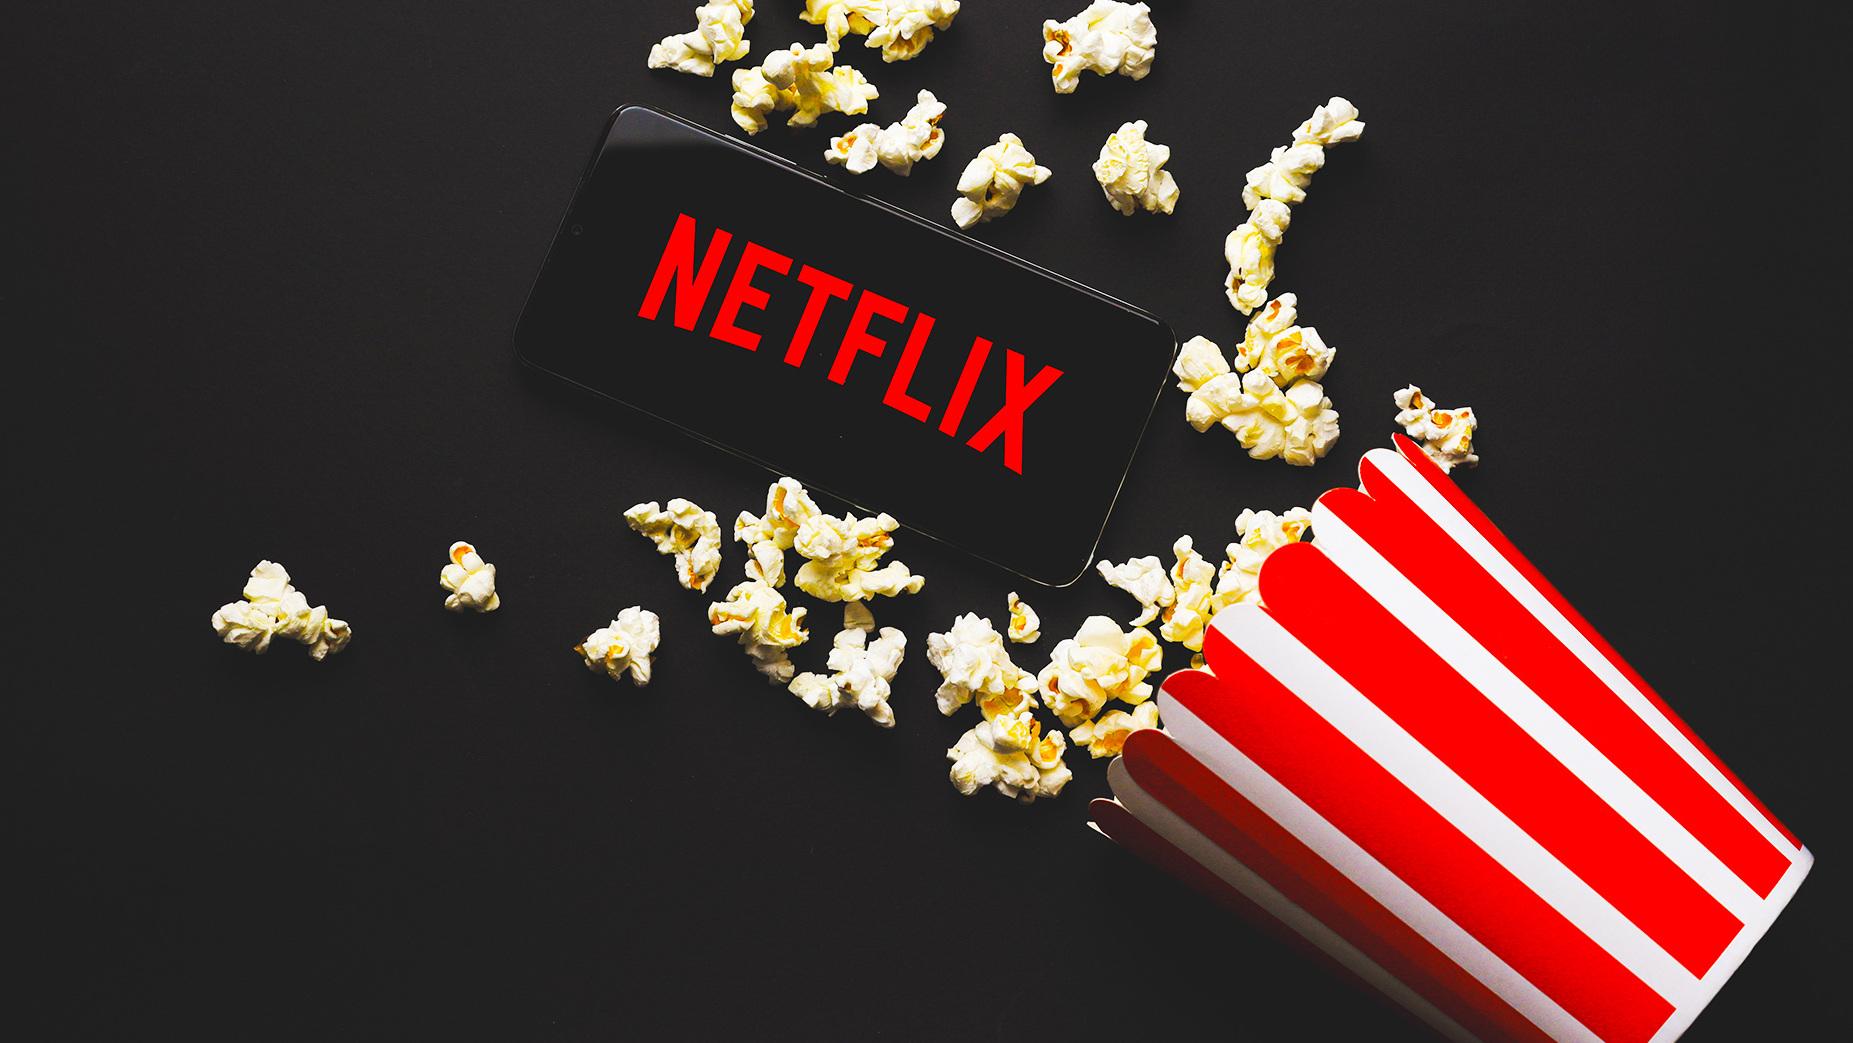 Netflix retail destinations will launch in 2025 for extra